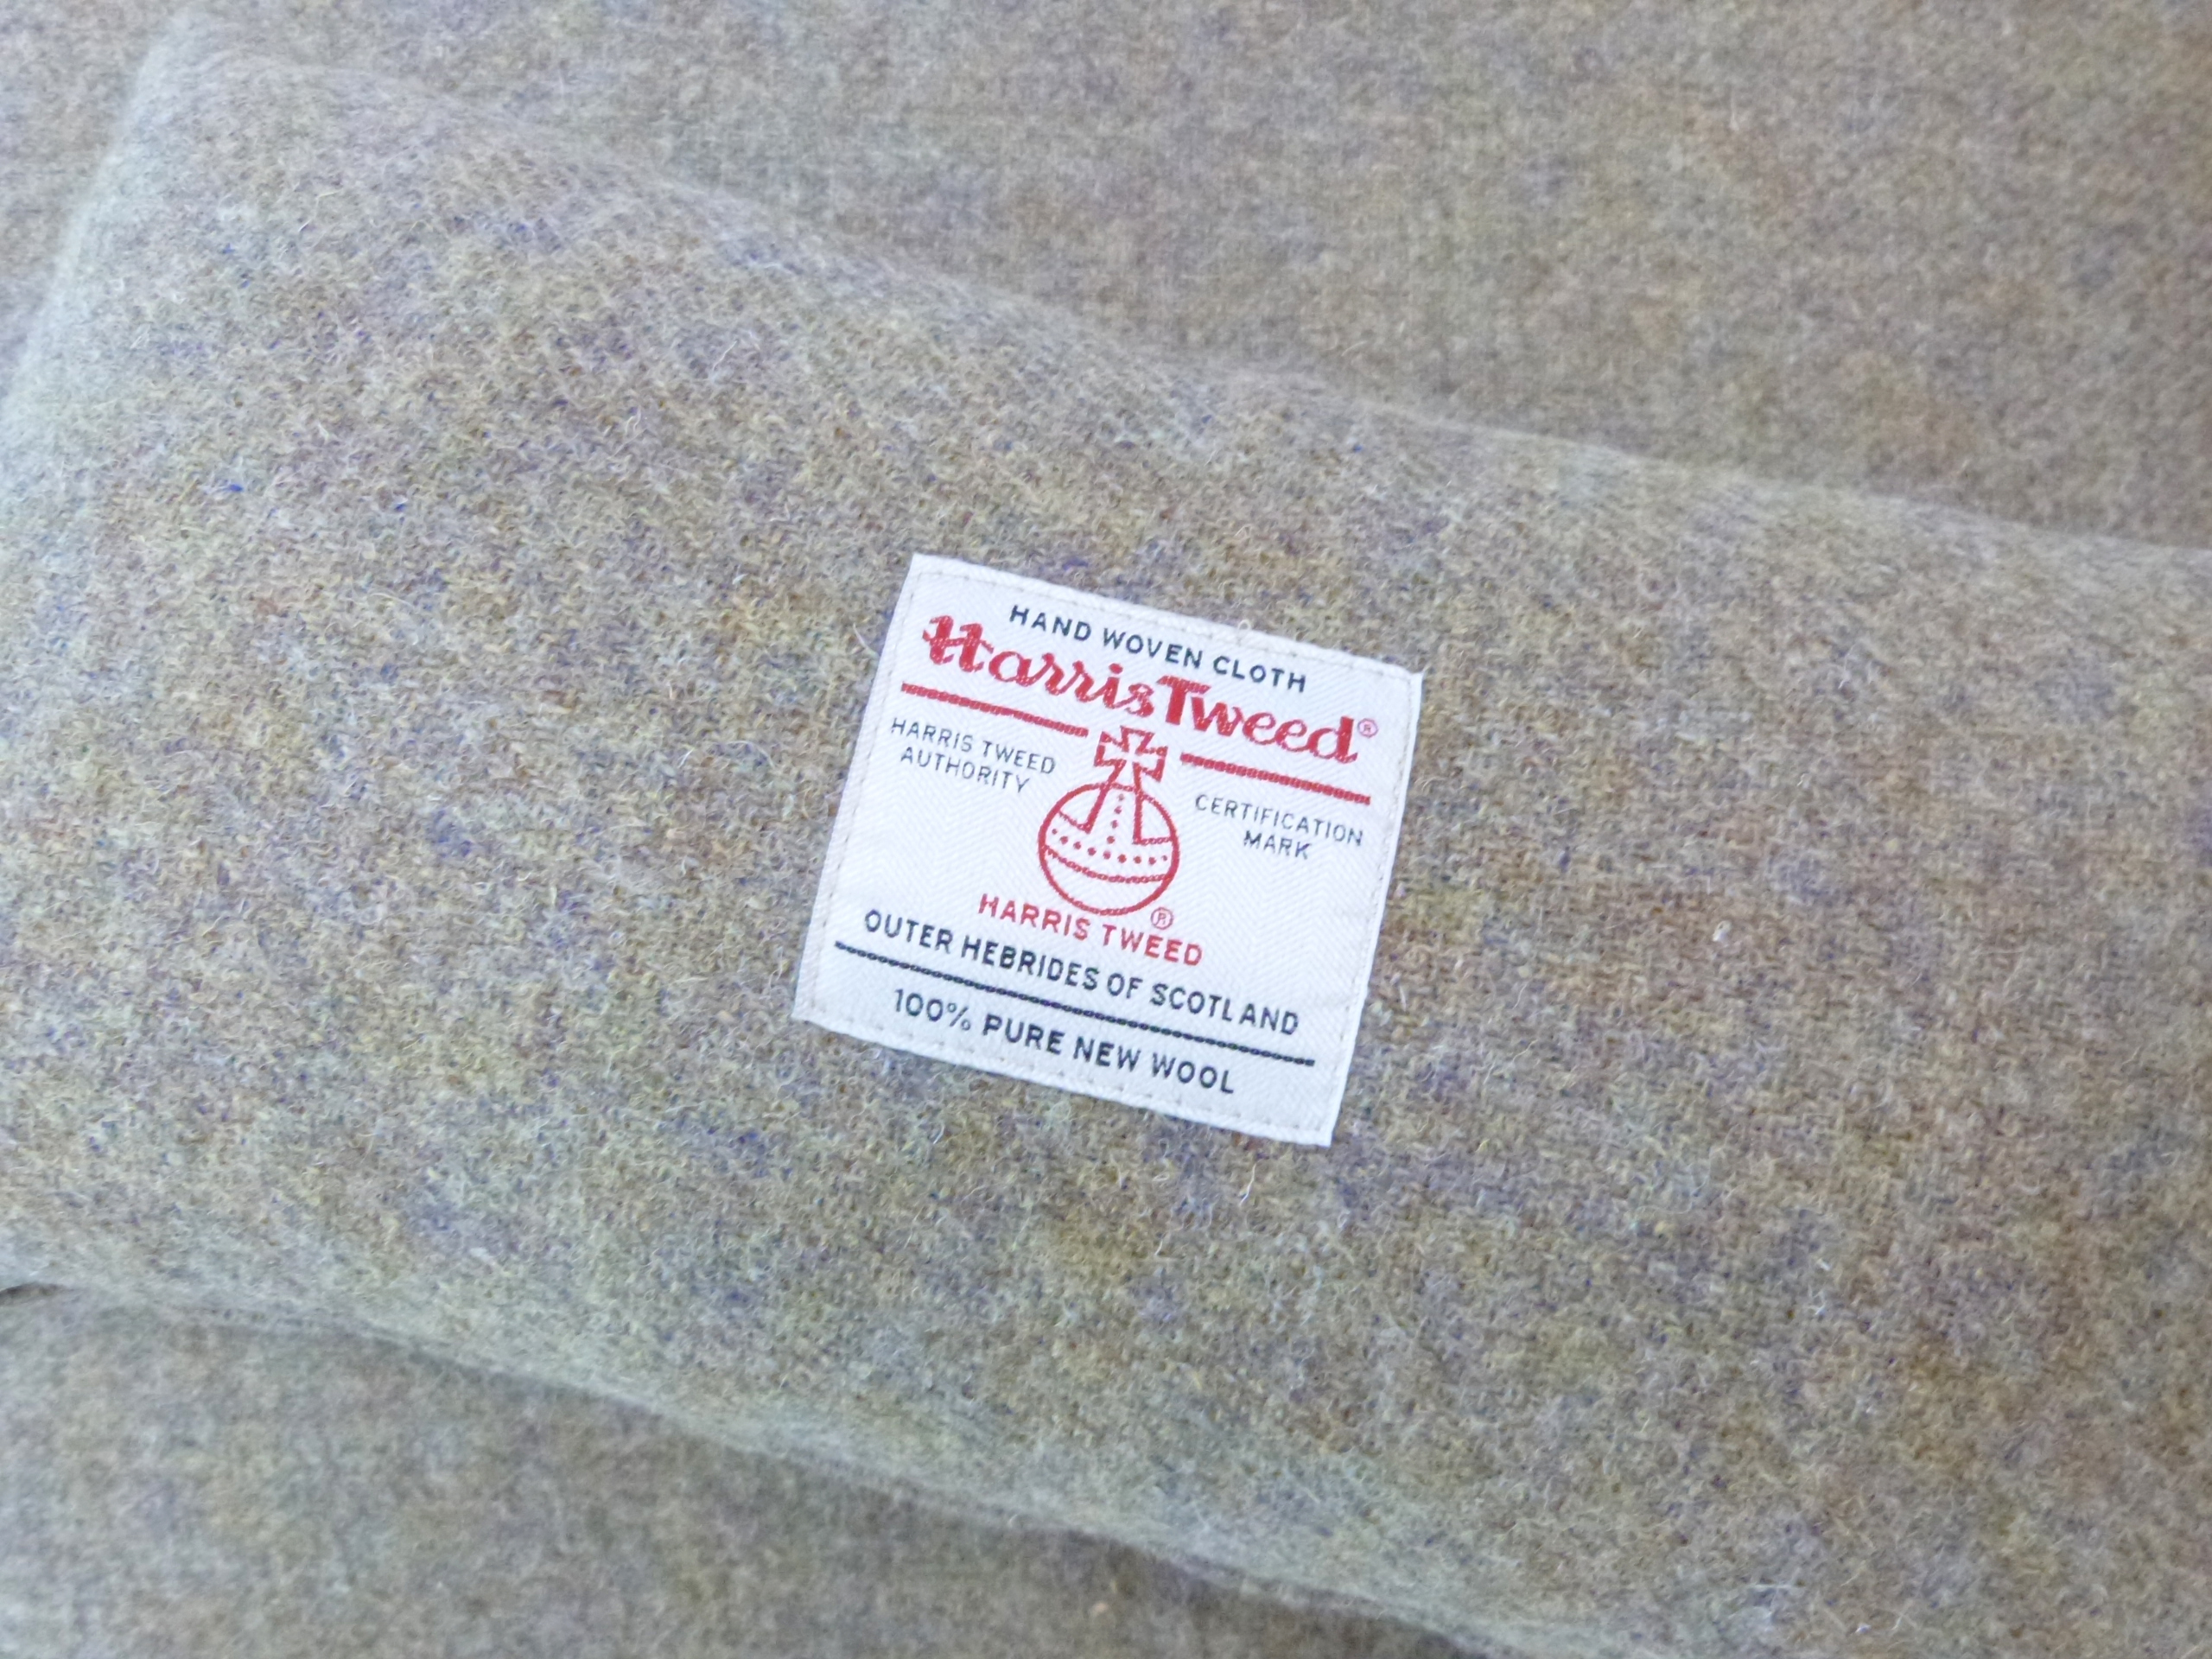 Victorian chaise longue with adjustable backrest, recently re-upholstered in pale Harris tweed - Image 7 of 8